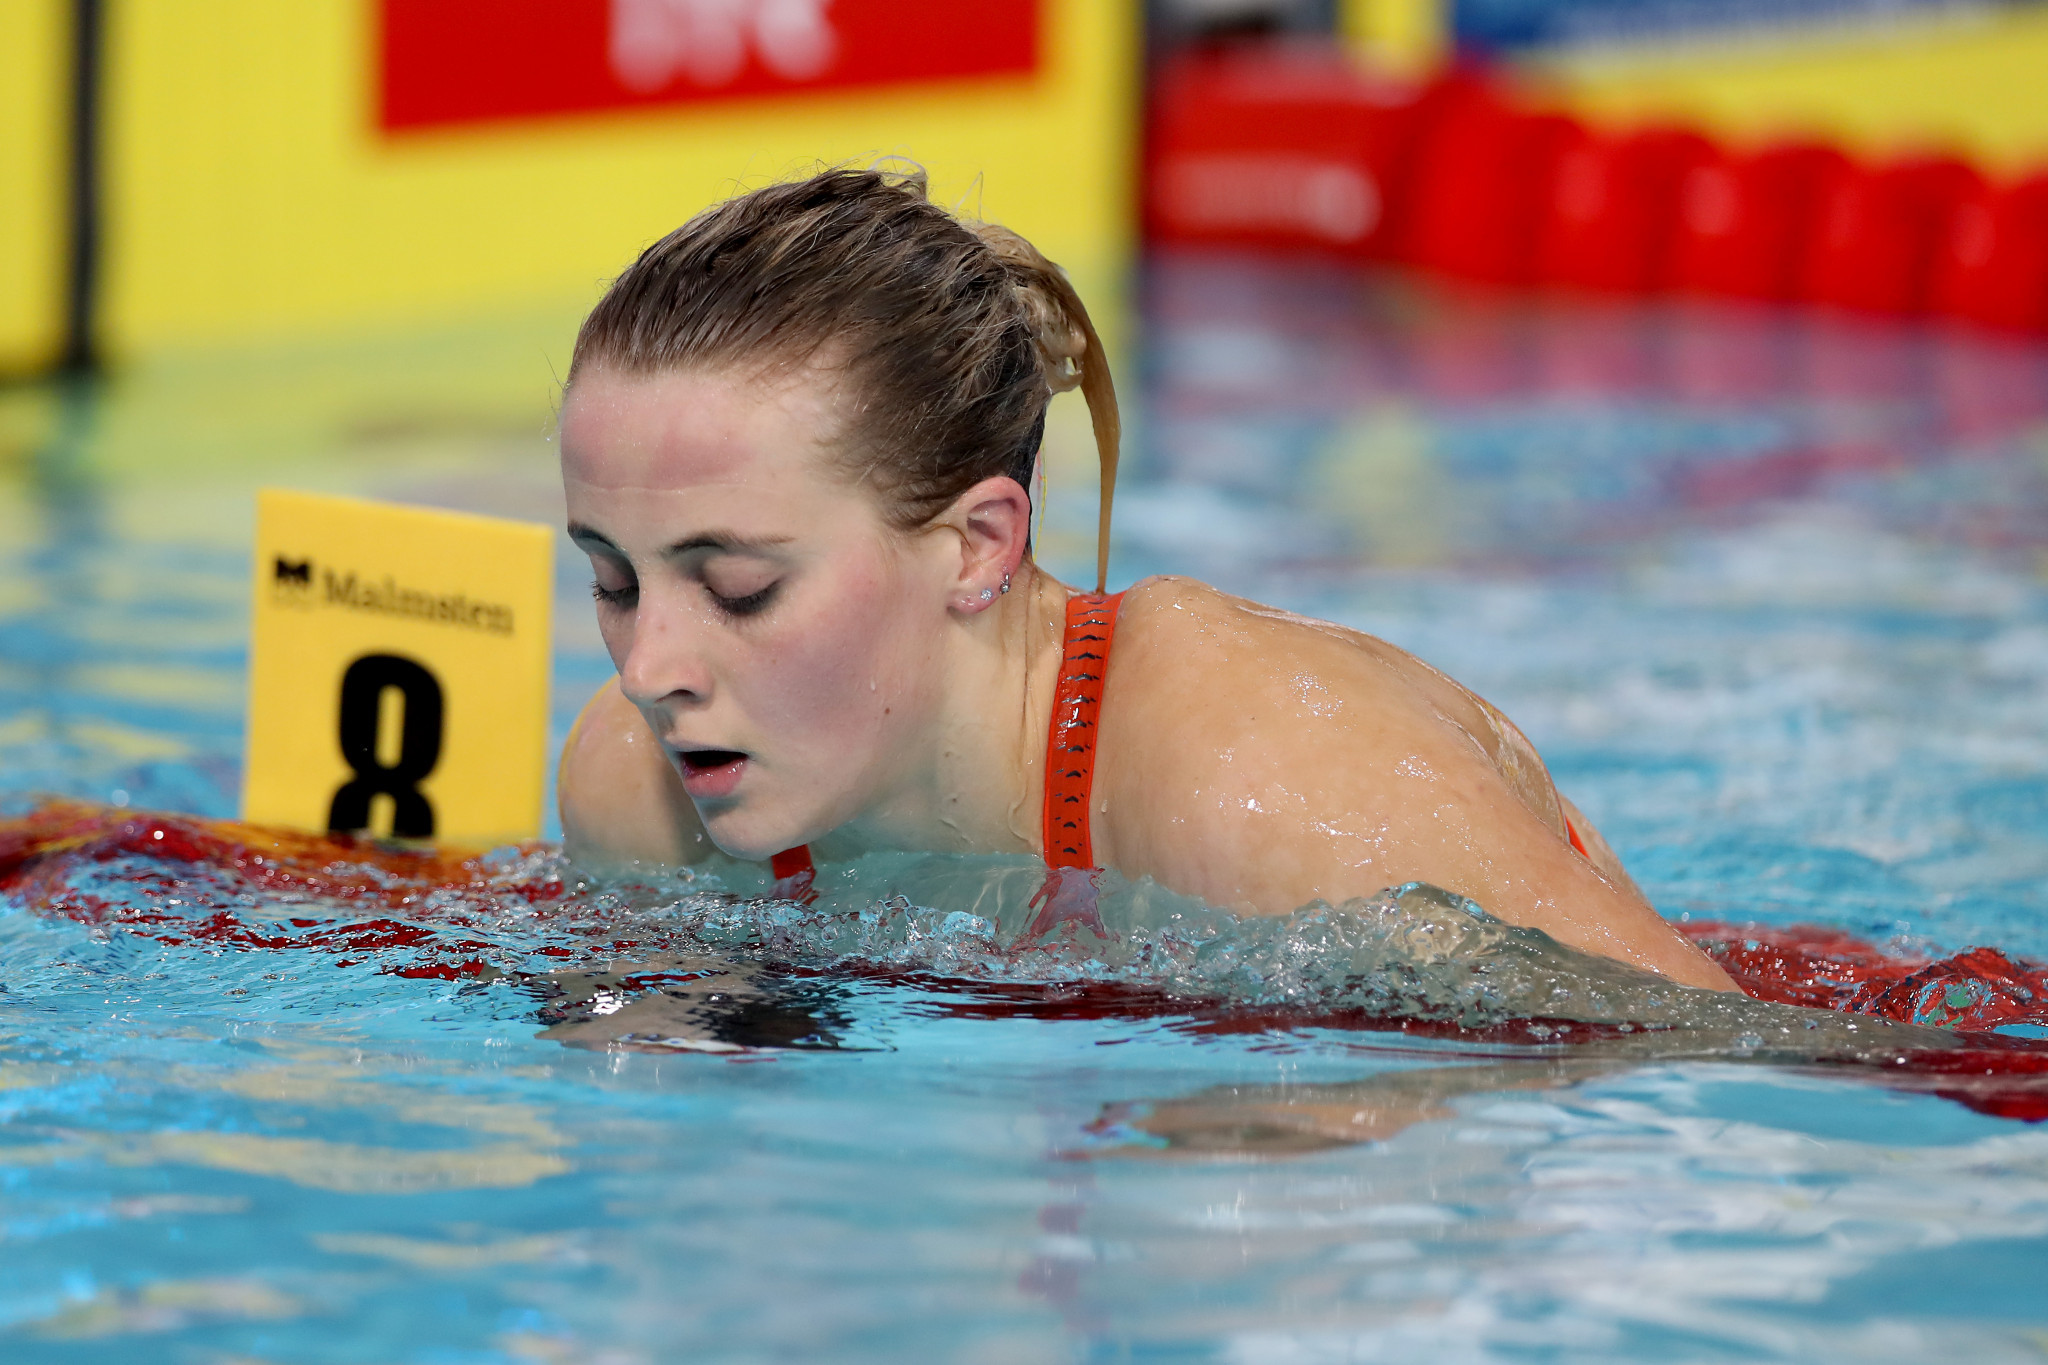 Siobhan-Marie O'Connor, who won the silver in the 200m individual medley at Rio 2016, had to settle for fifth in the final this evening ©Getty Images